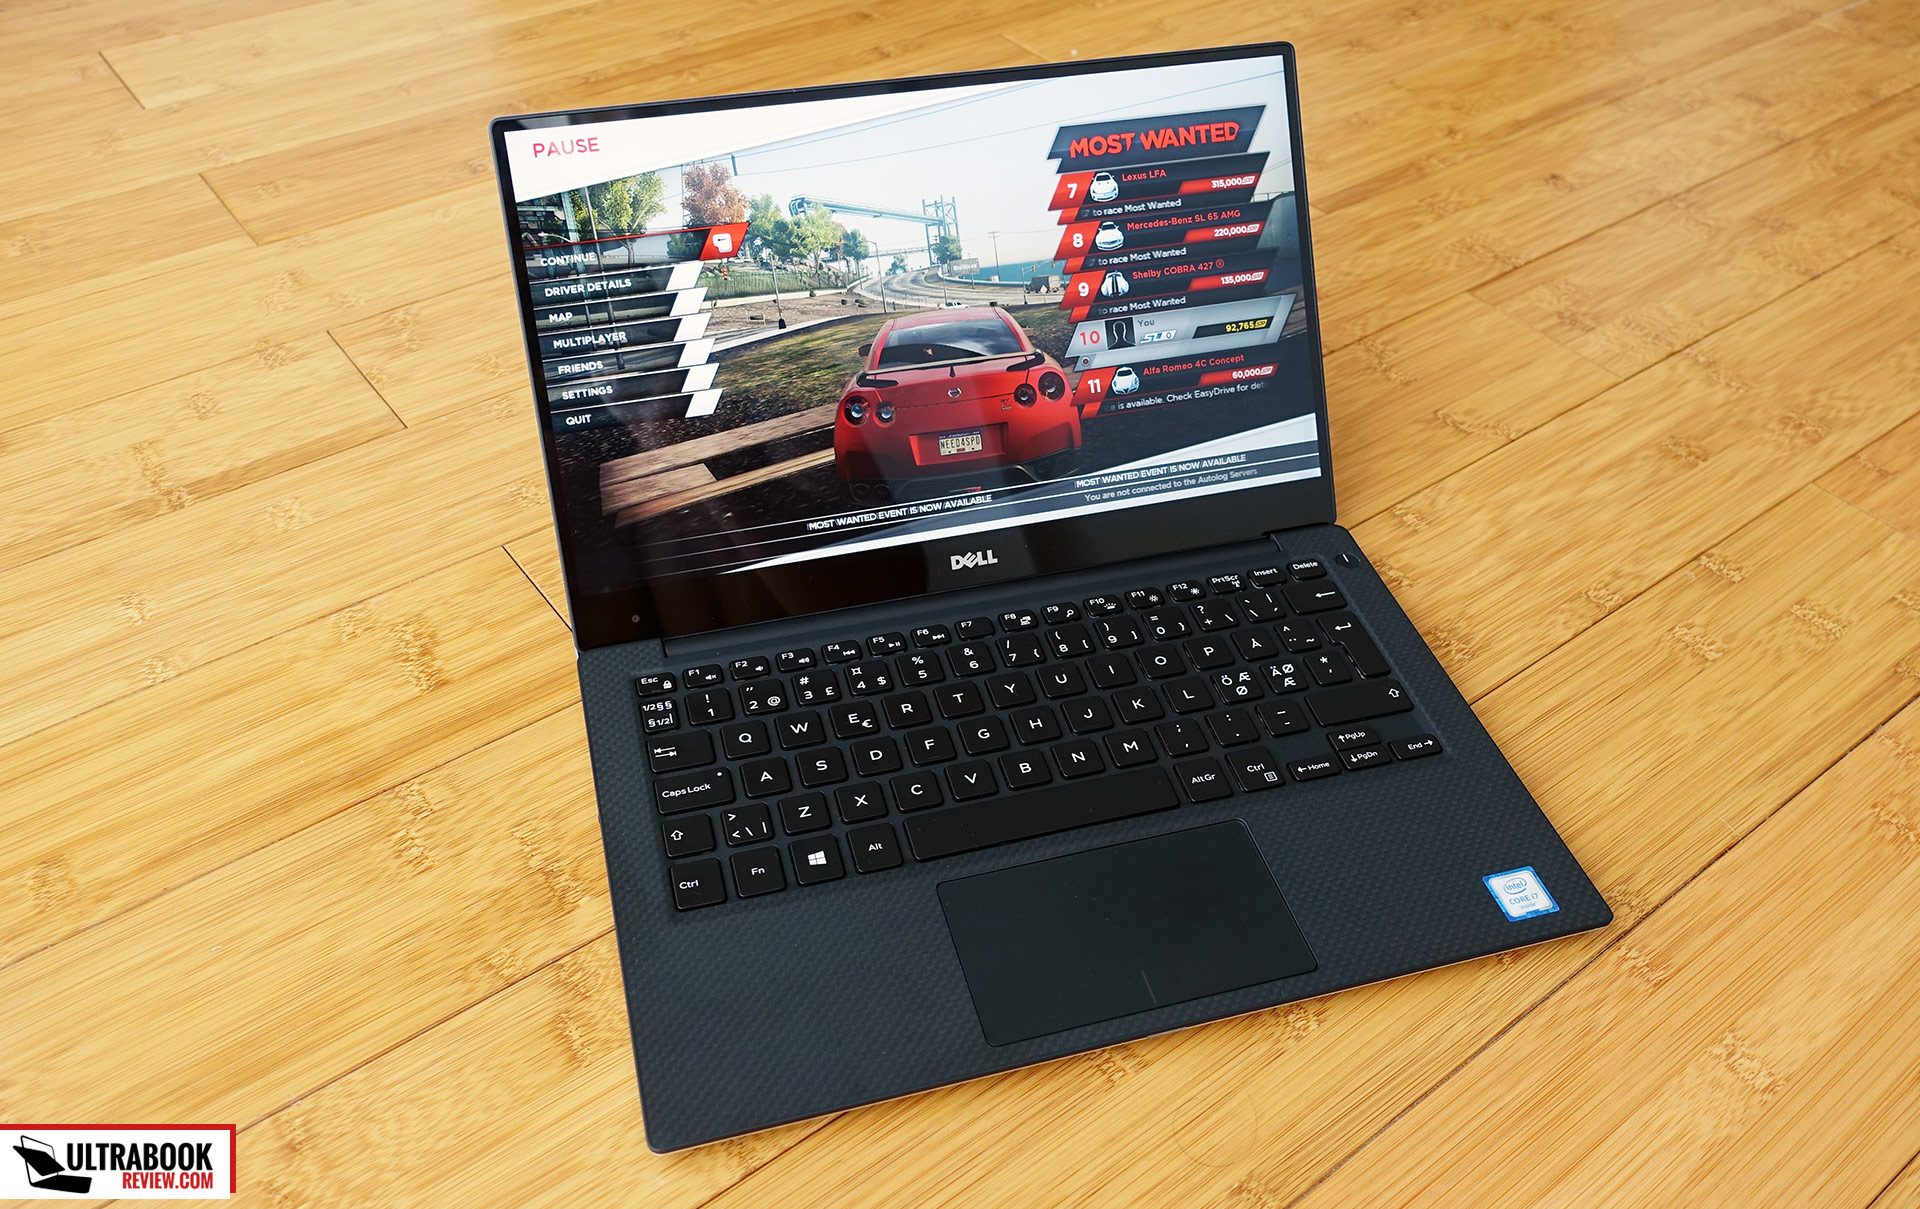 The Core i7 XPS 9350 gets hot under load